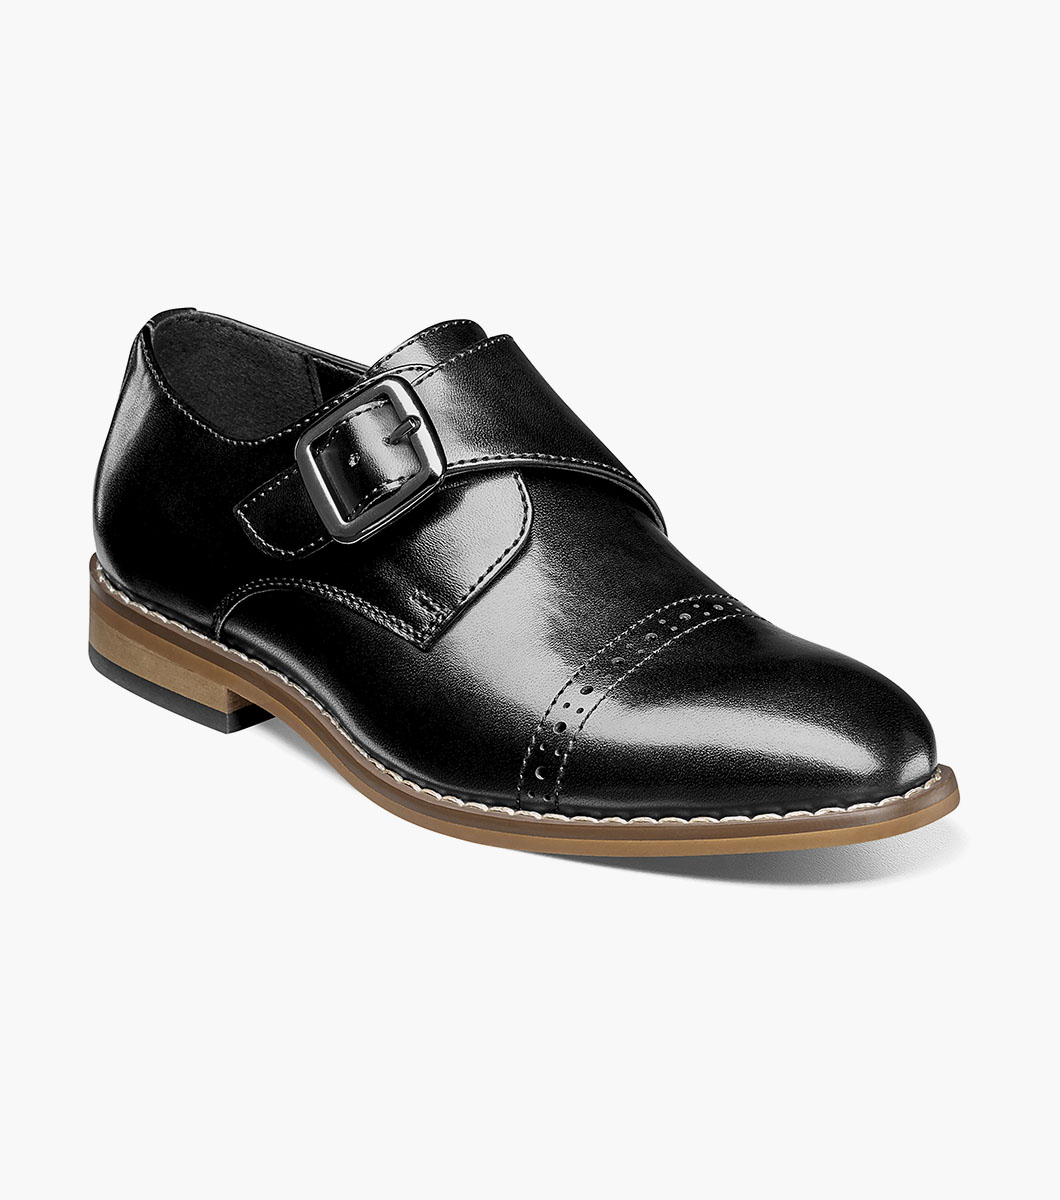 SmartFit Boys Leather Monk Strap Casual